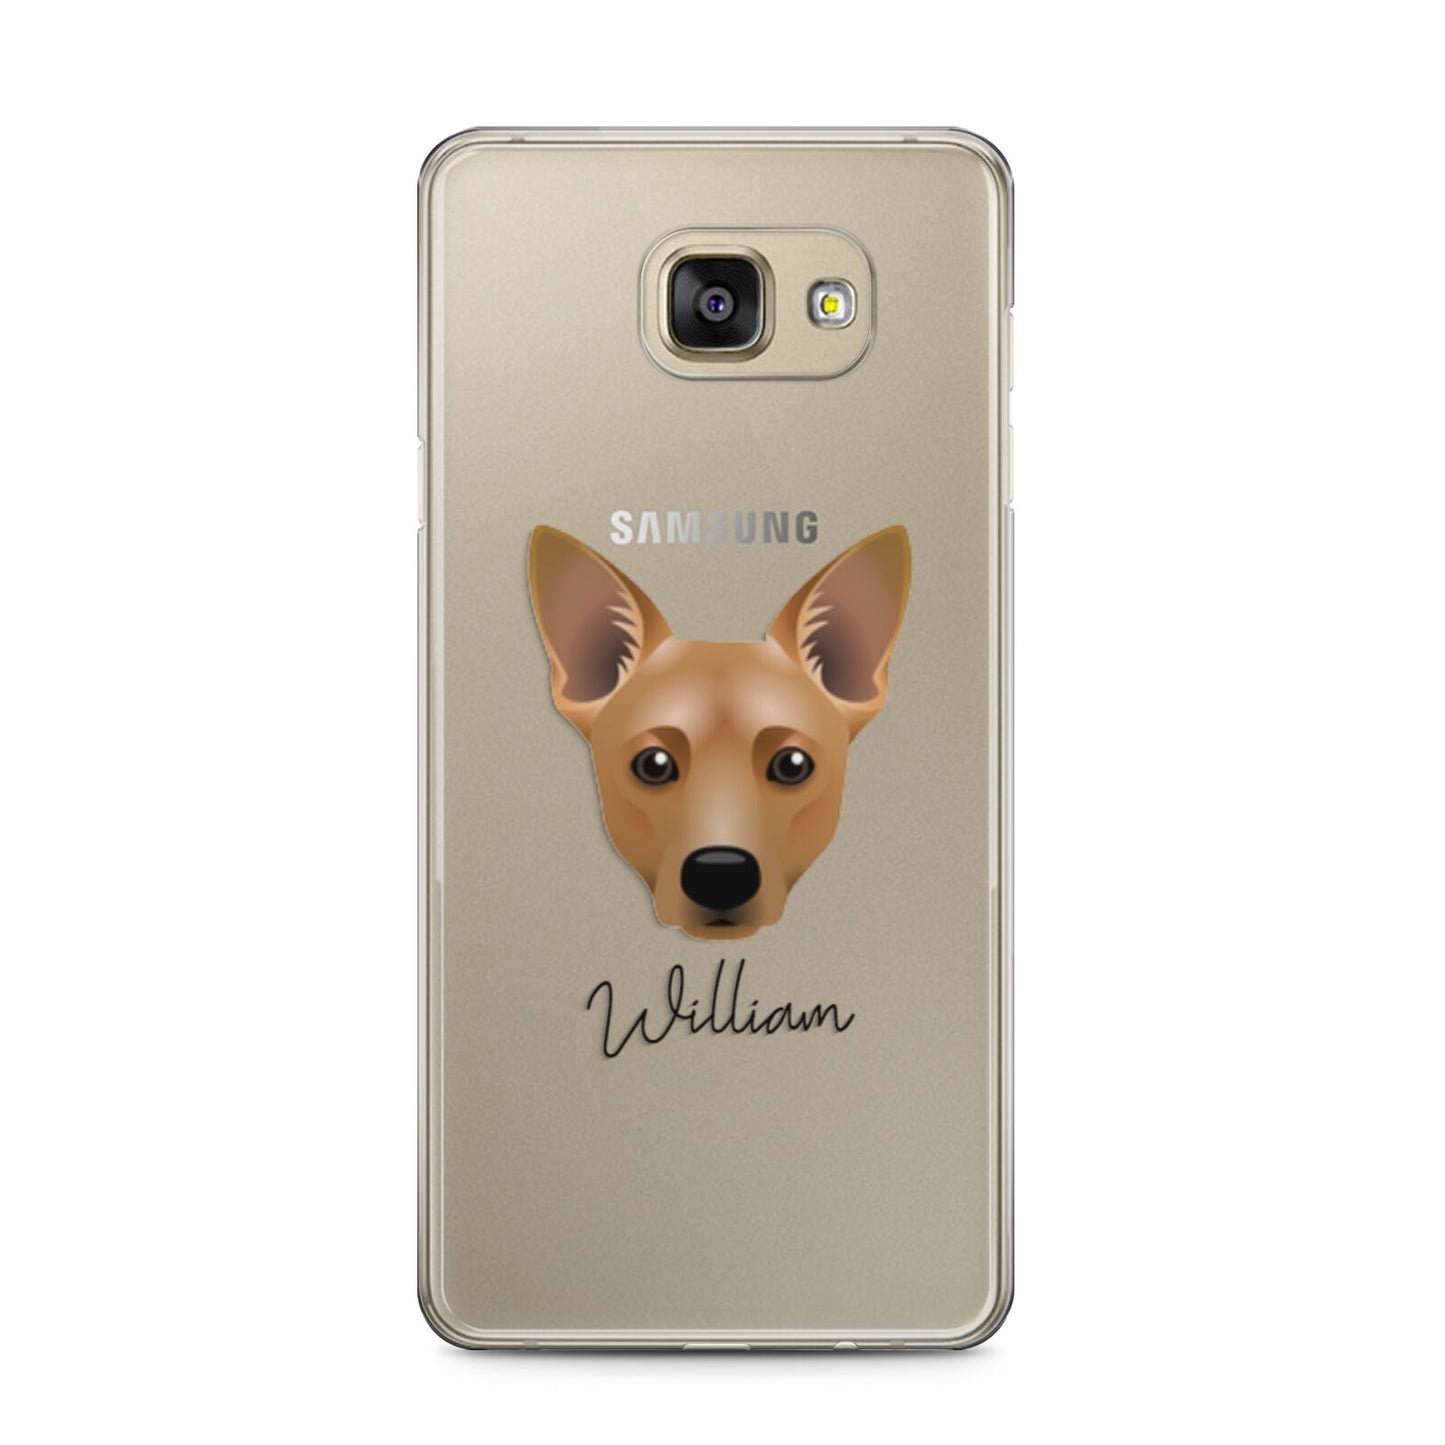 Cojack Personalised Samsung Galaxy A5 2016 Case on gold phone